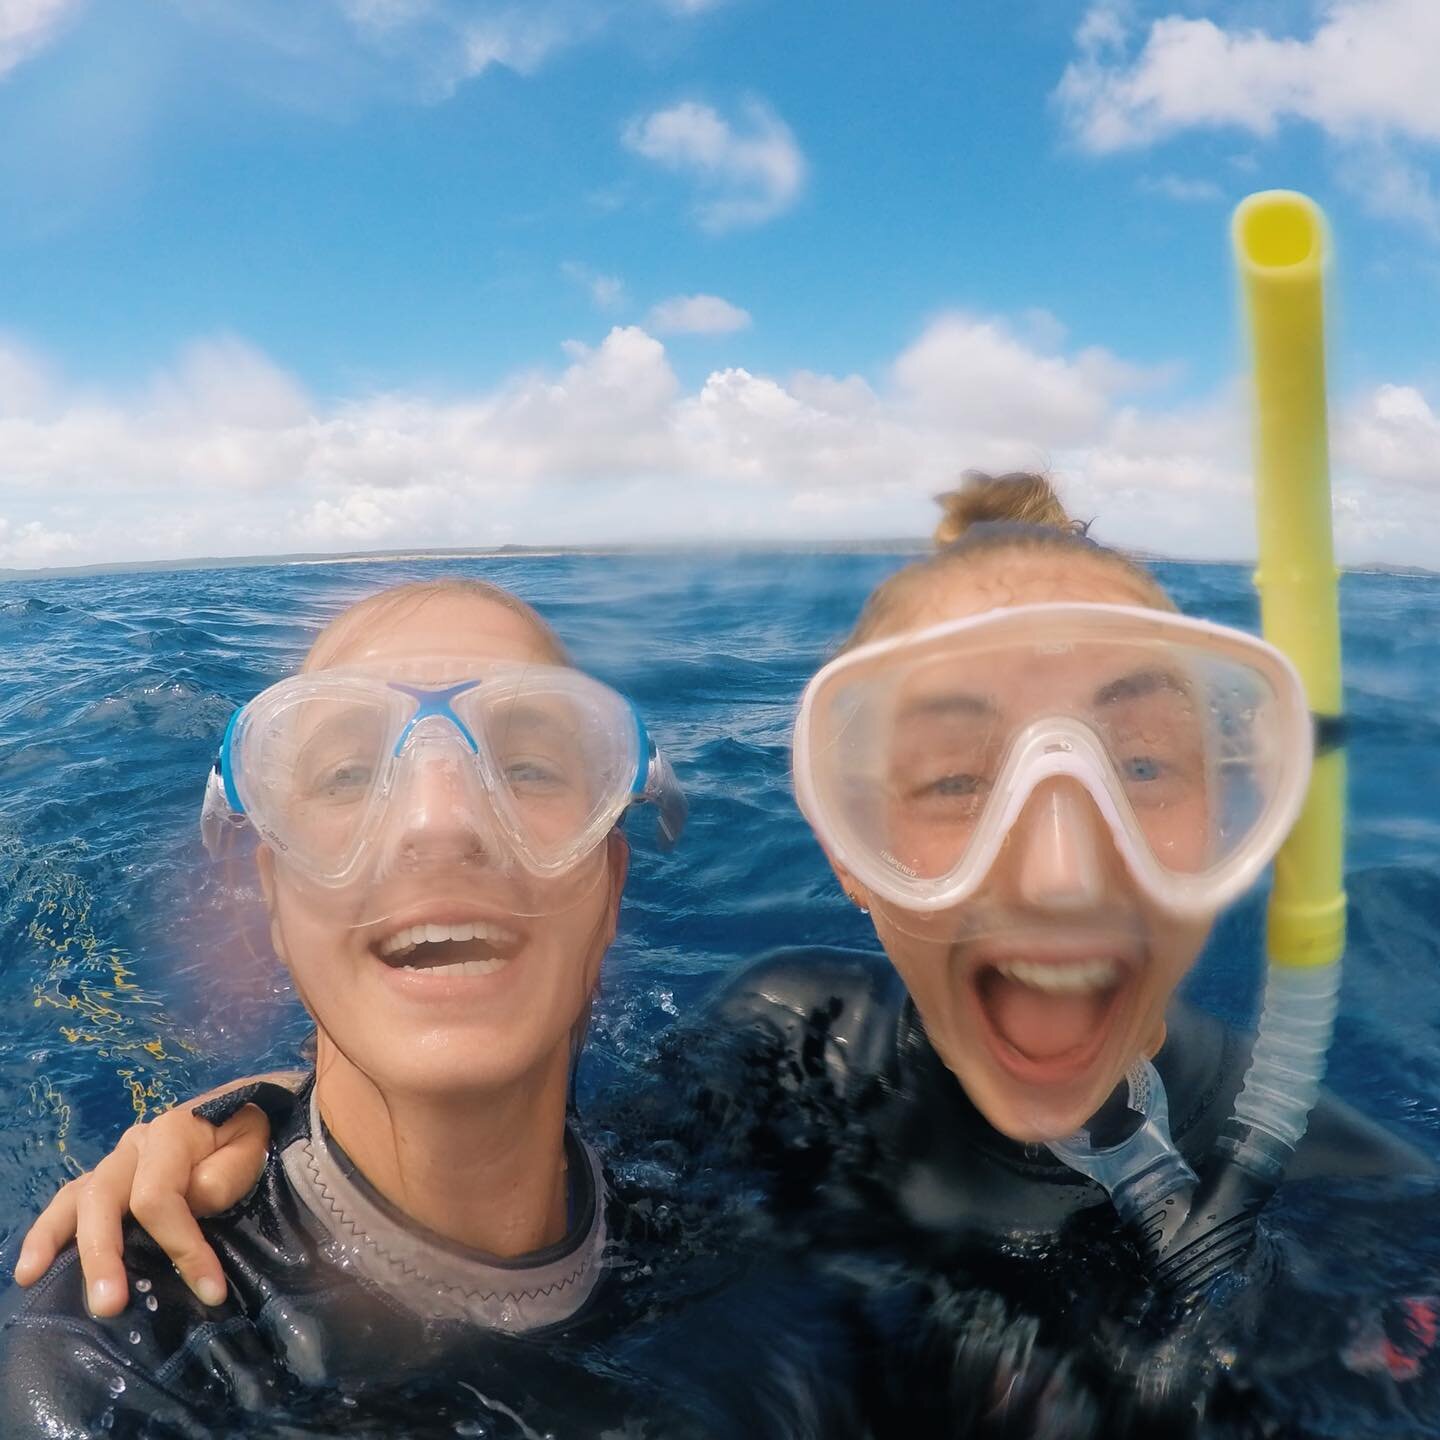 Trip Spotlight Mallorca: Dive the Med

Explore Mallorca and the Mediterranean coastline this summer! This scuba diving and environmental service program allows students to discover the island both on land and underwater. We also visit the island of M